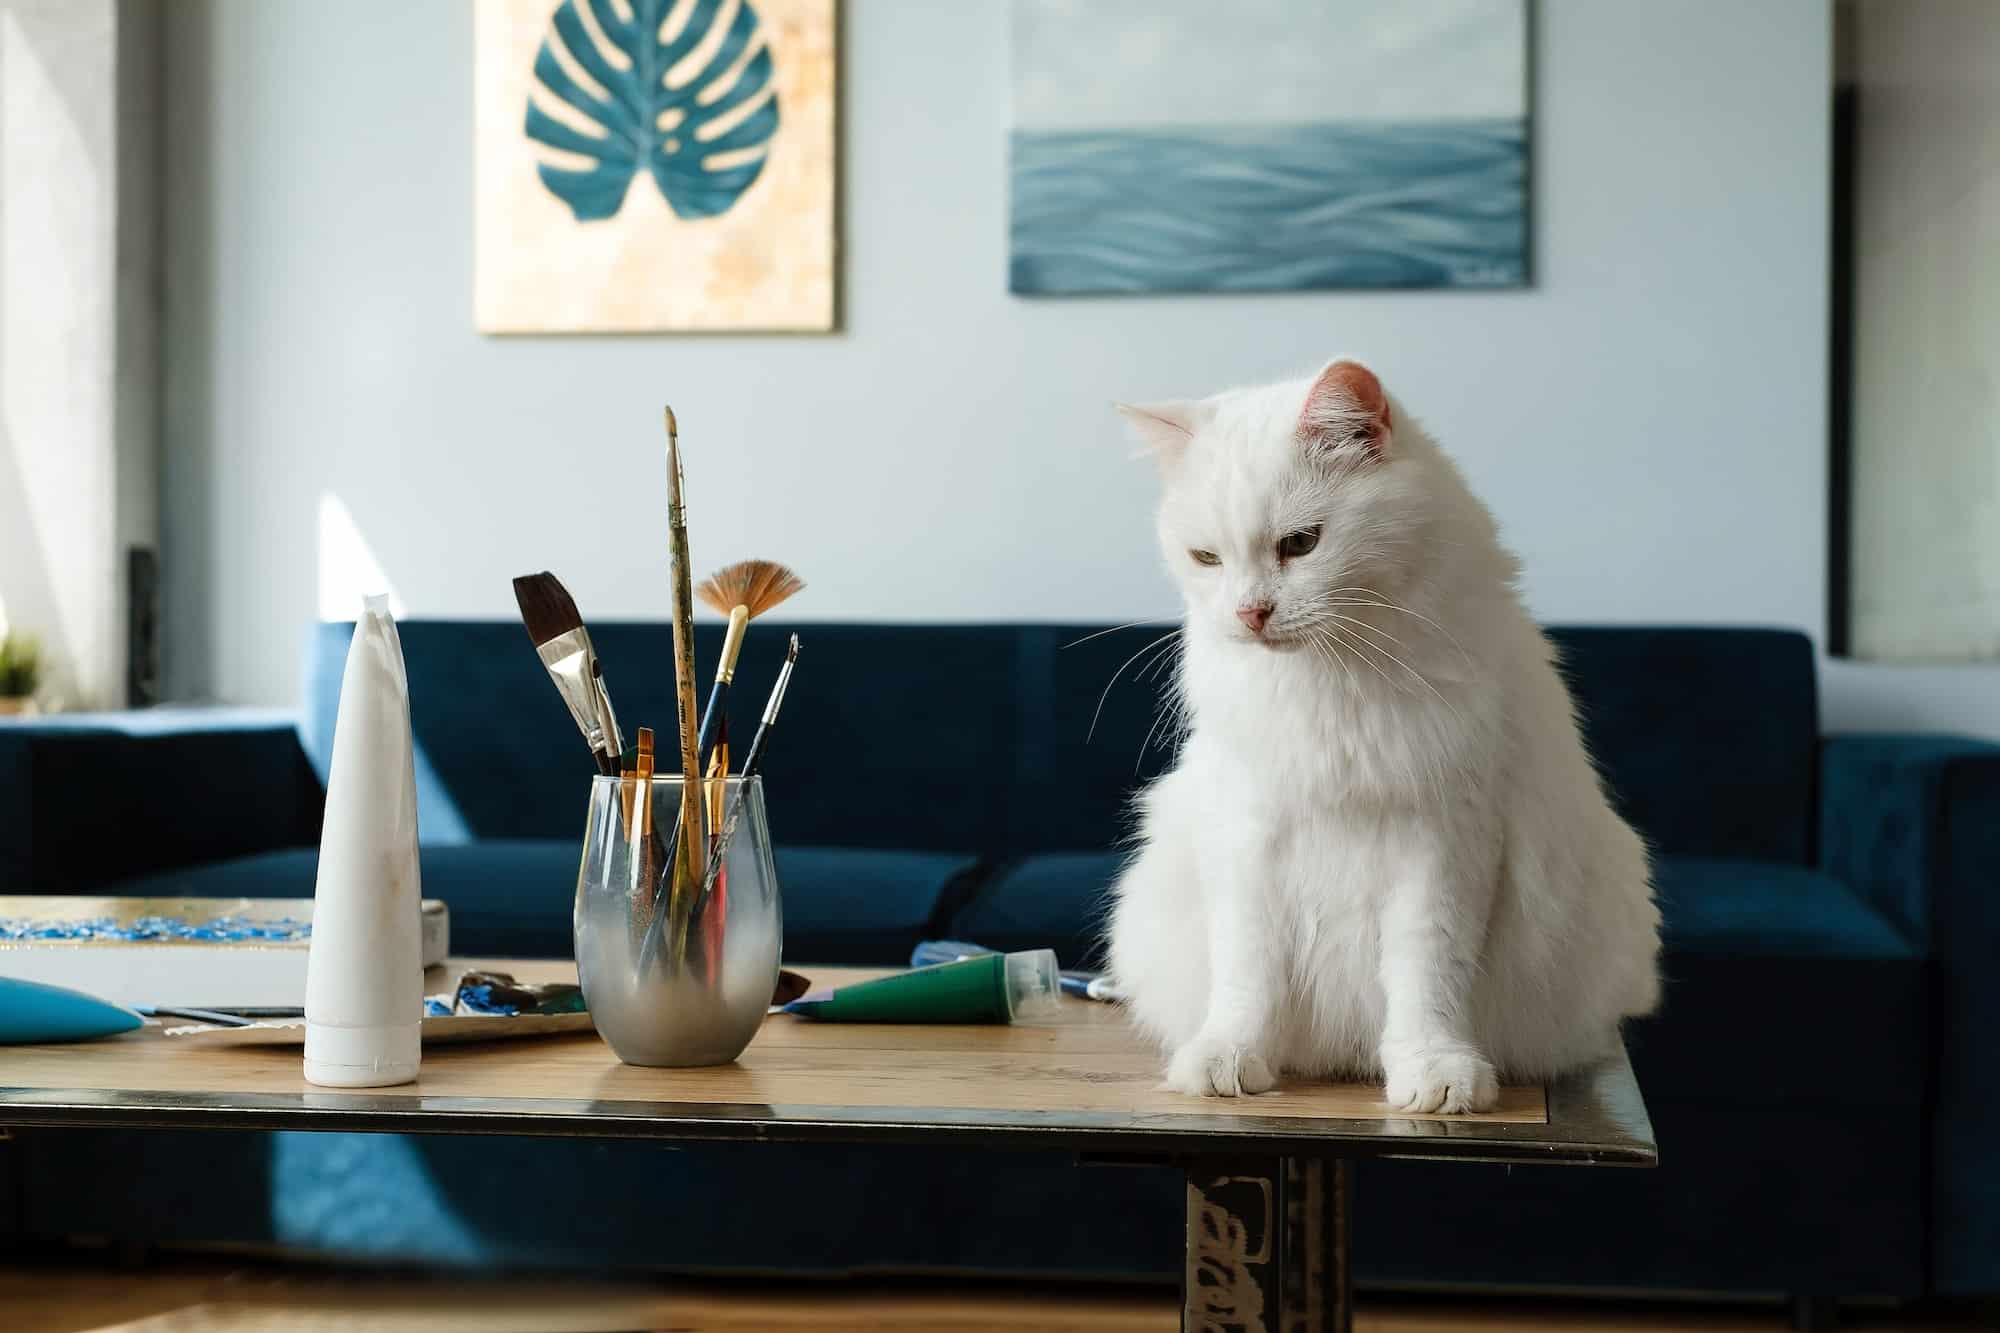 White cat sitting on the table near paintbrushes